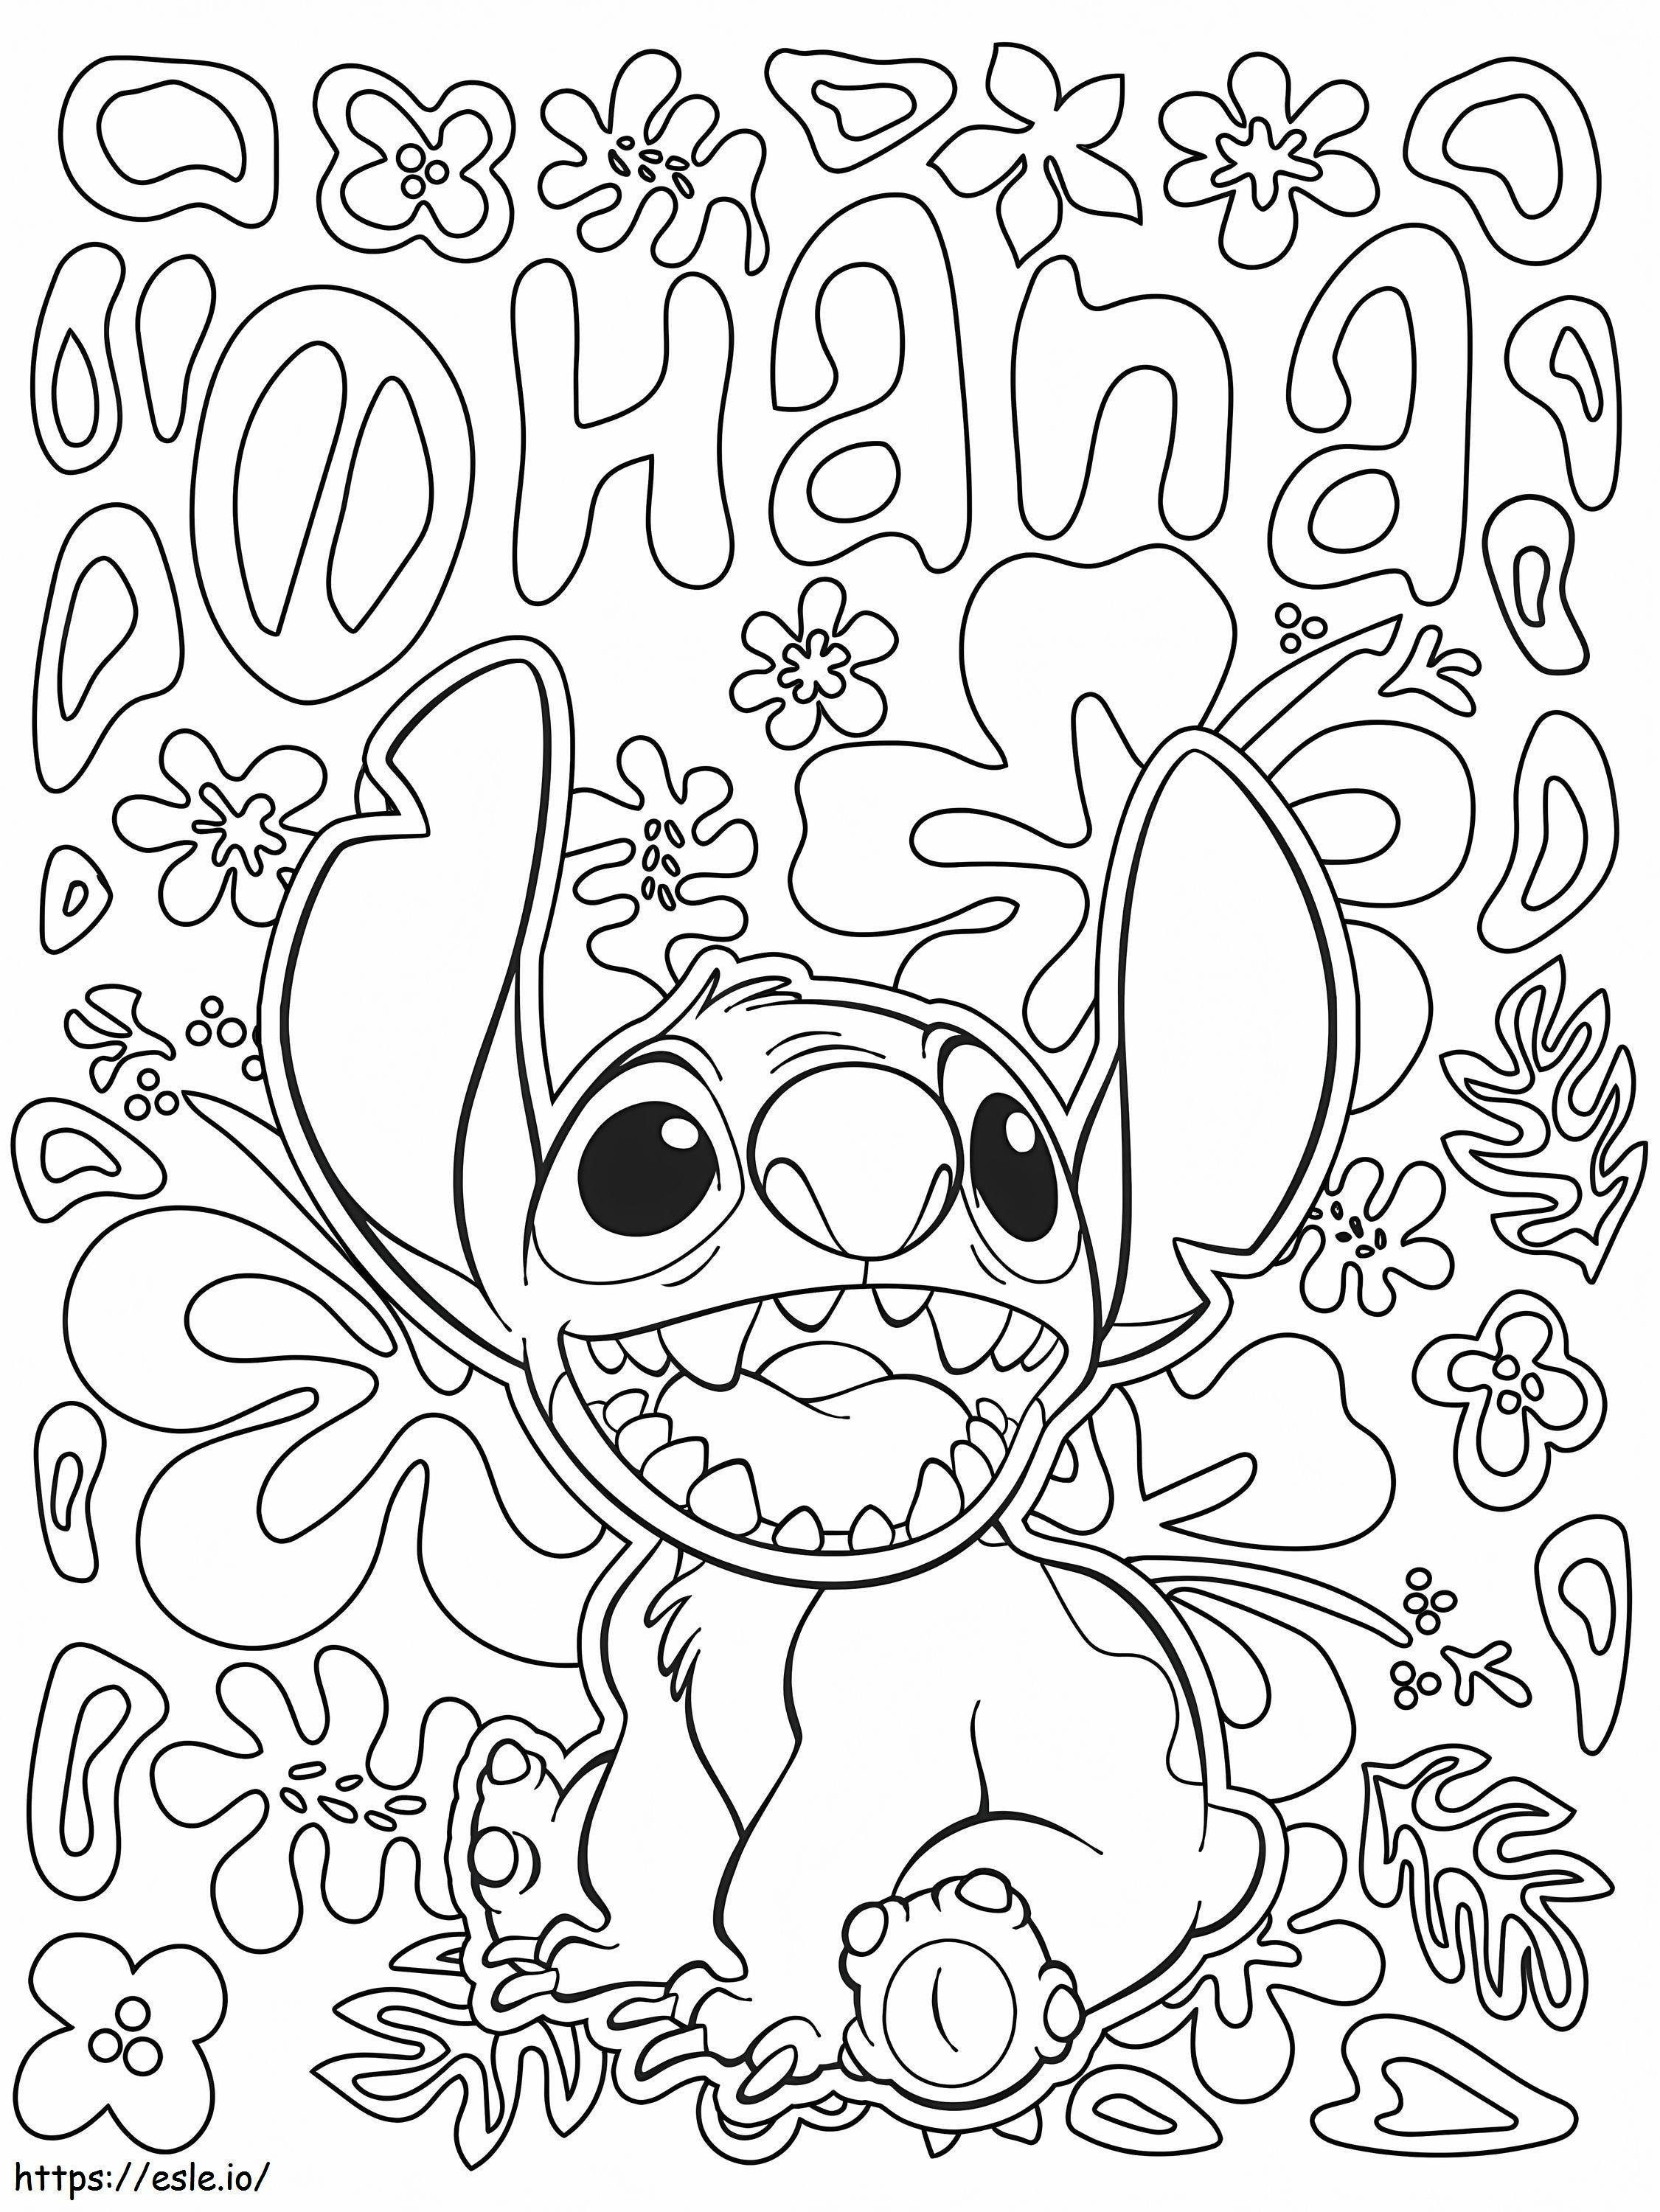 Work coloring page